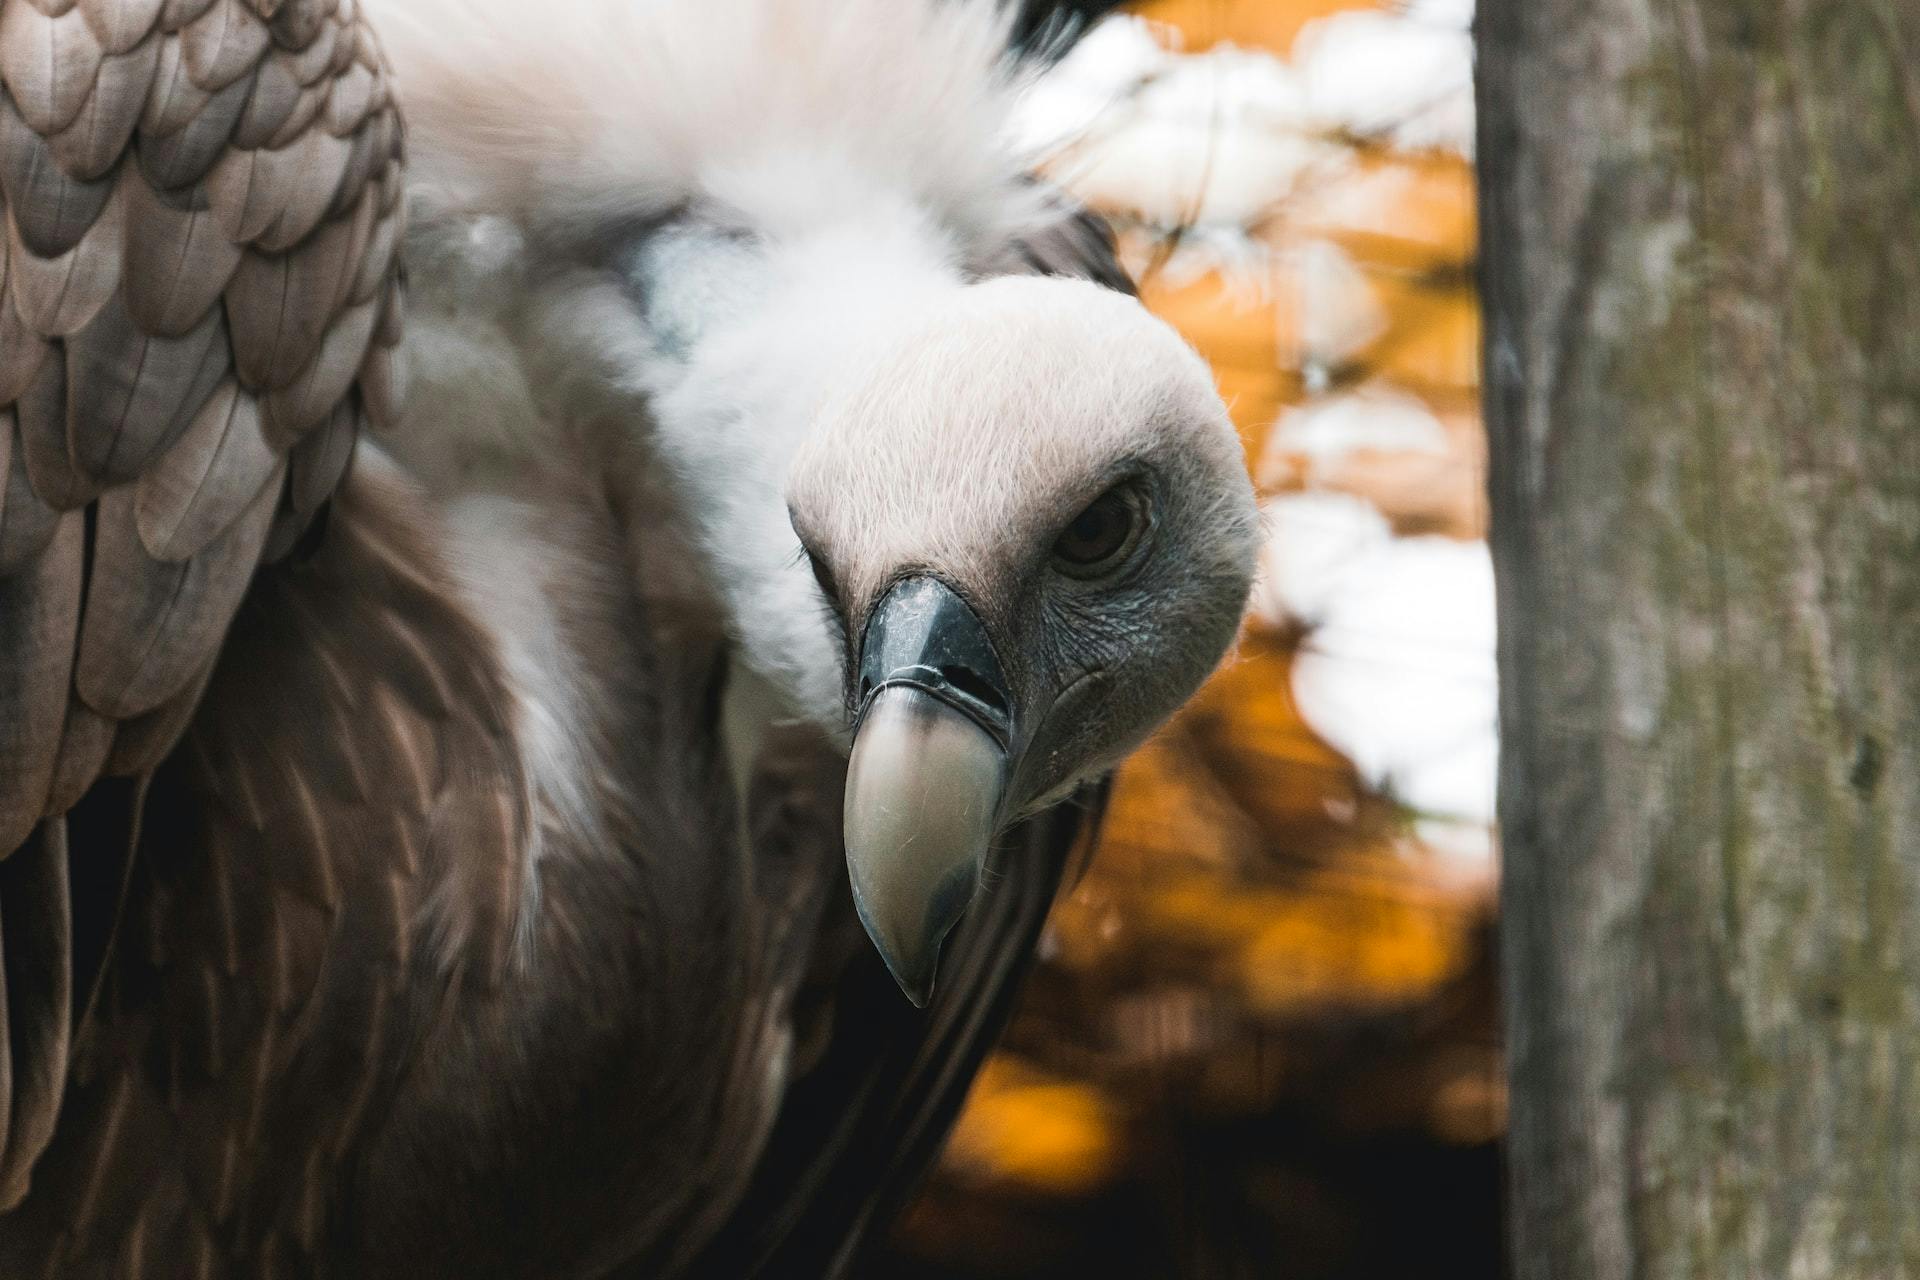 A close-up shot of a condor. In the background, there is wood and some blurry leaves.